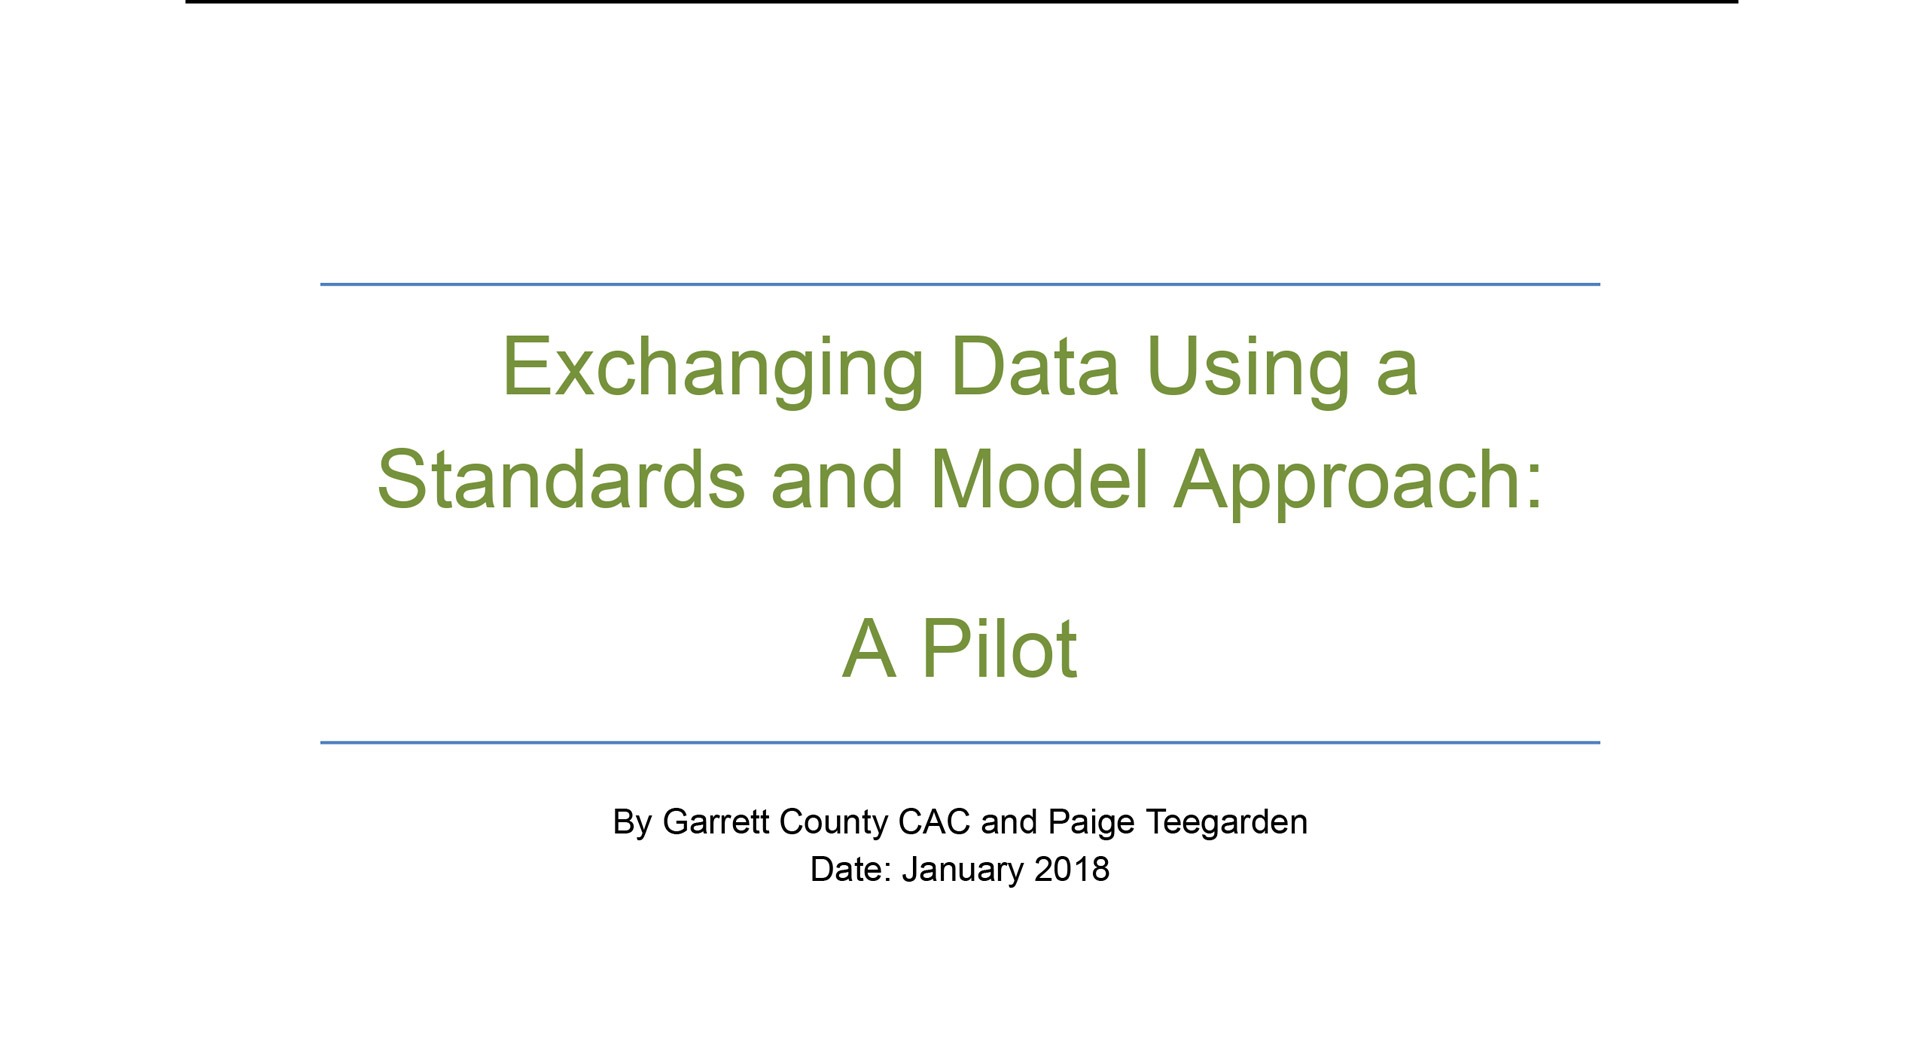 Exchanging-Data-Using-a-Standards-and-Model-Approach-A-Pilot-(1).docx-1